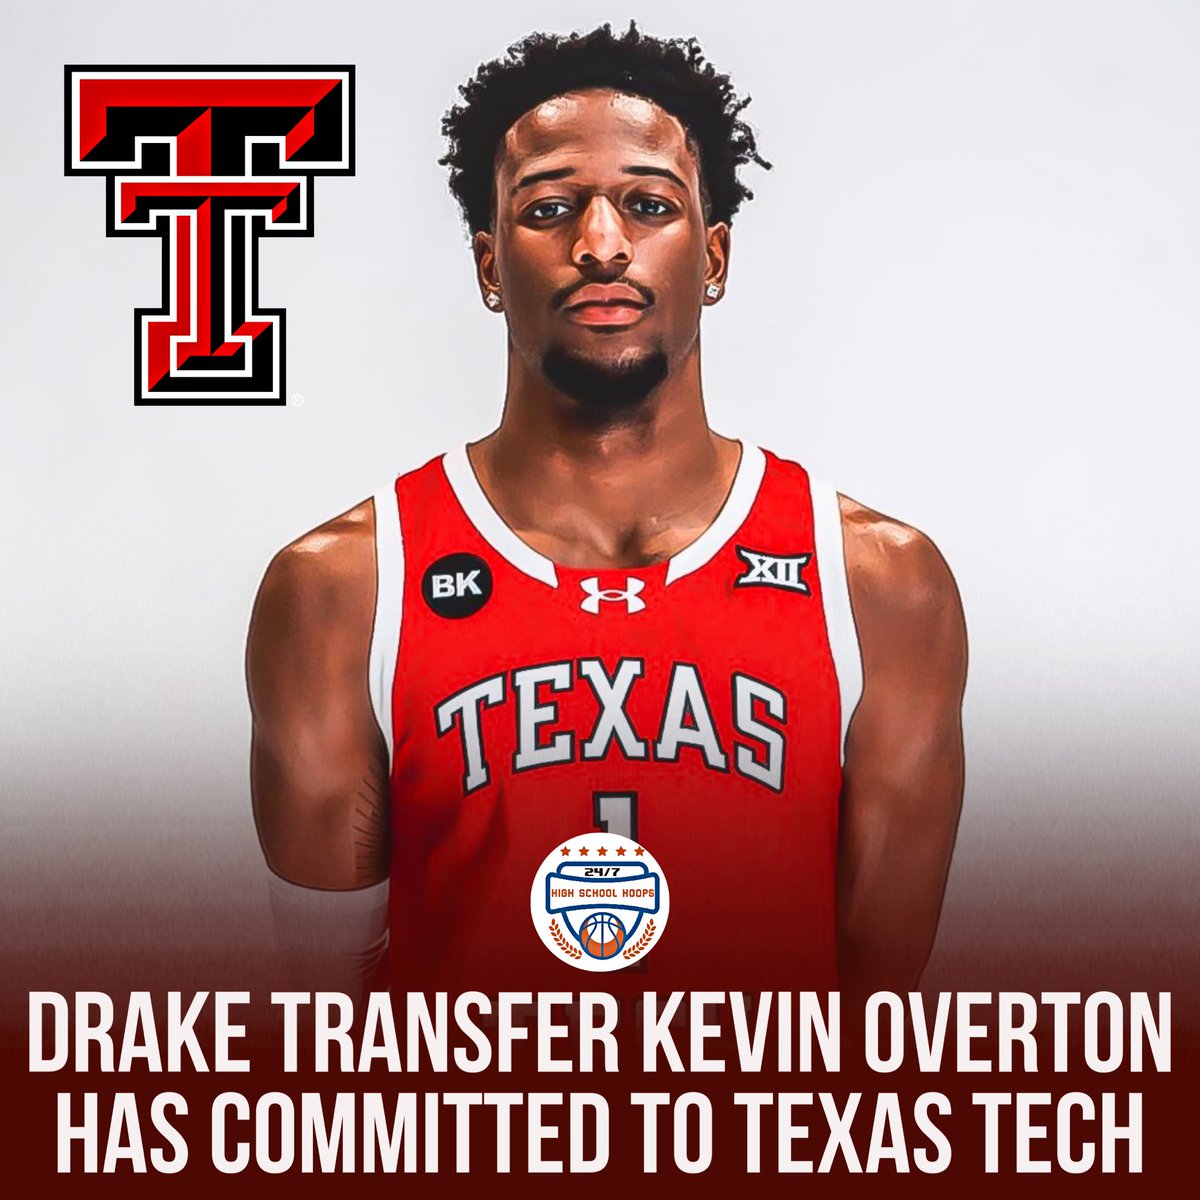 NEWS: Drake transfer Kevin Overton has committed to Texas Tech and Grant McCasland, per source. Overton played just his freshman season at Drake and was named to the All-Missouri Valley Freshman Team this season. He averaged 11.3PPG, 3.3RPG and 1.1APG in 23-24.